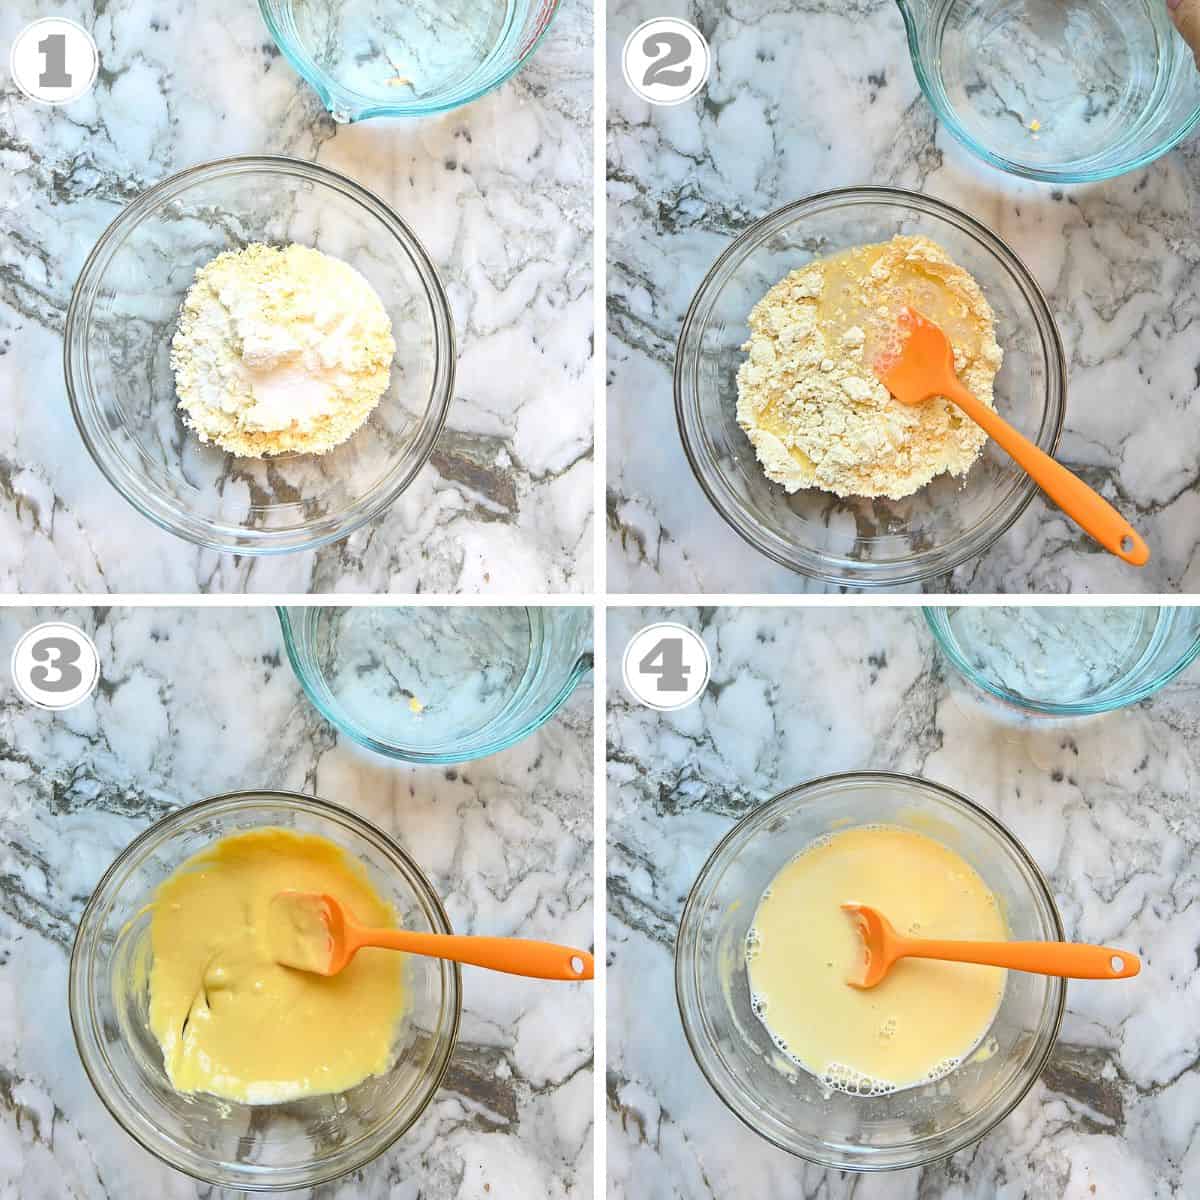 photos one through four sowing how to make gram flour batter 